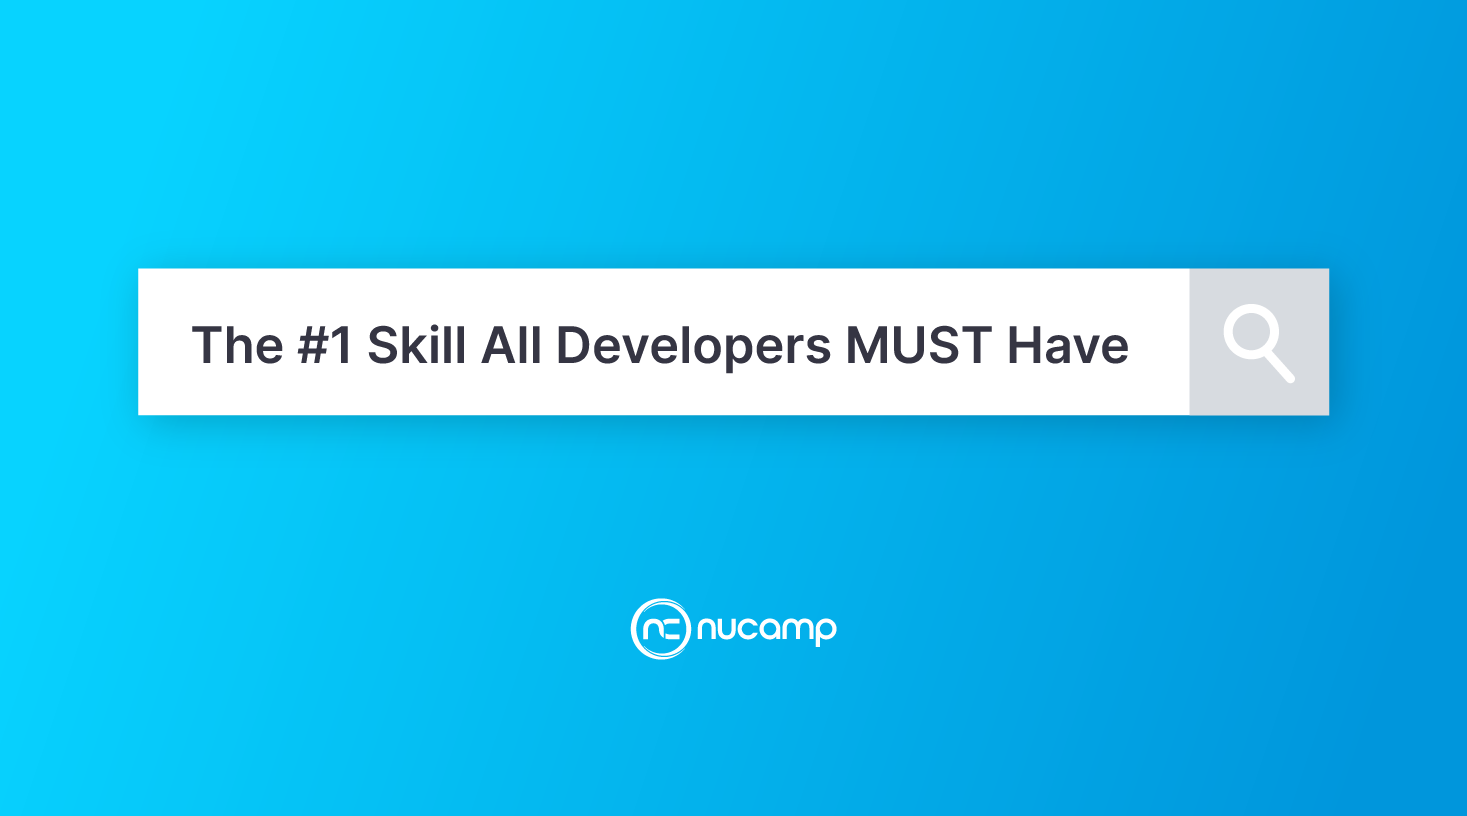 The top skill all developers must have when looking to pivot into a coding career